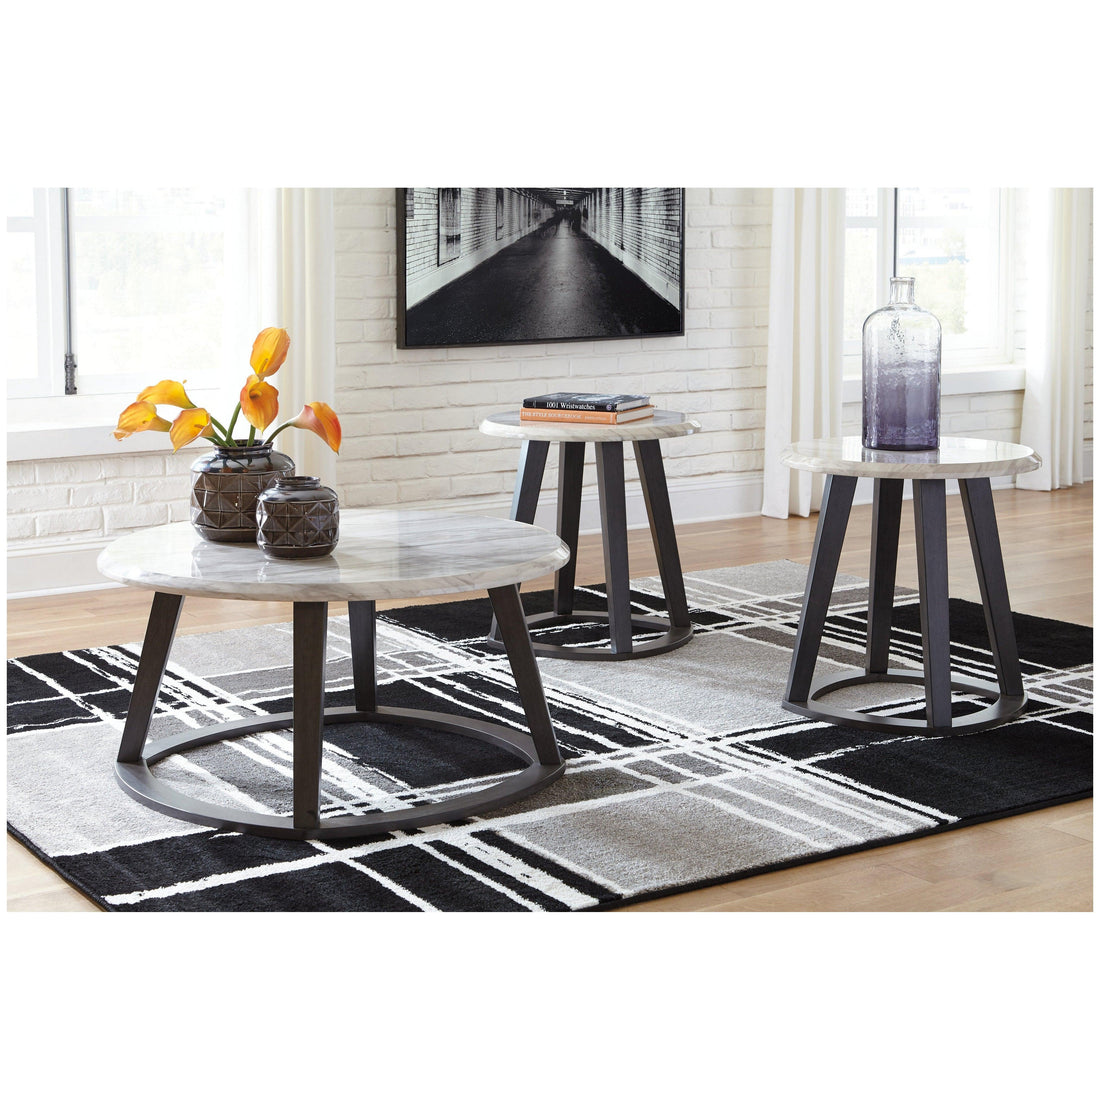 Luvoni Table (Set of 3) Ash-T414-13